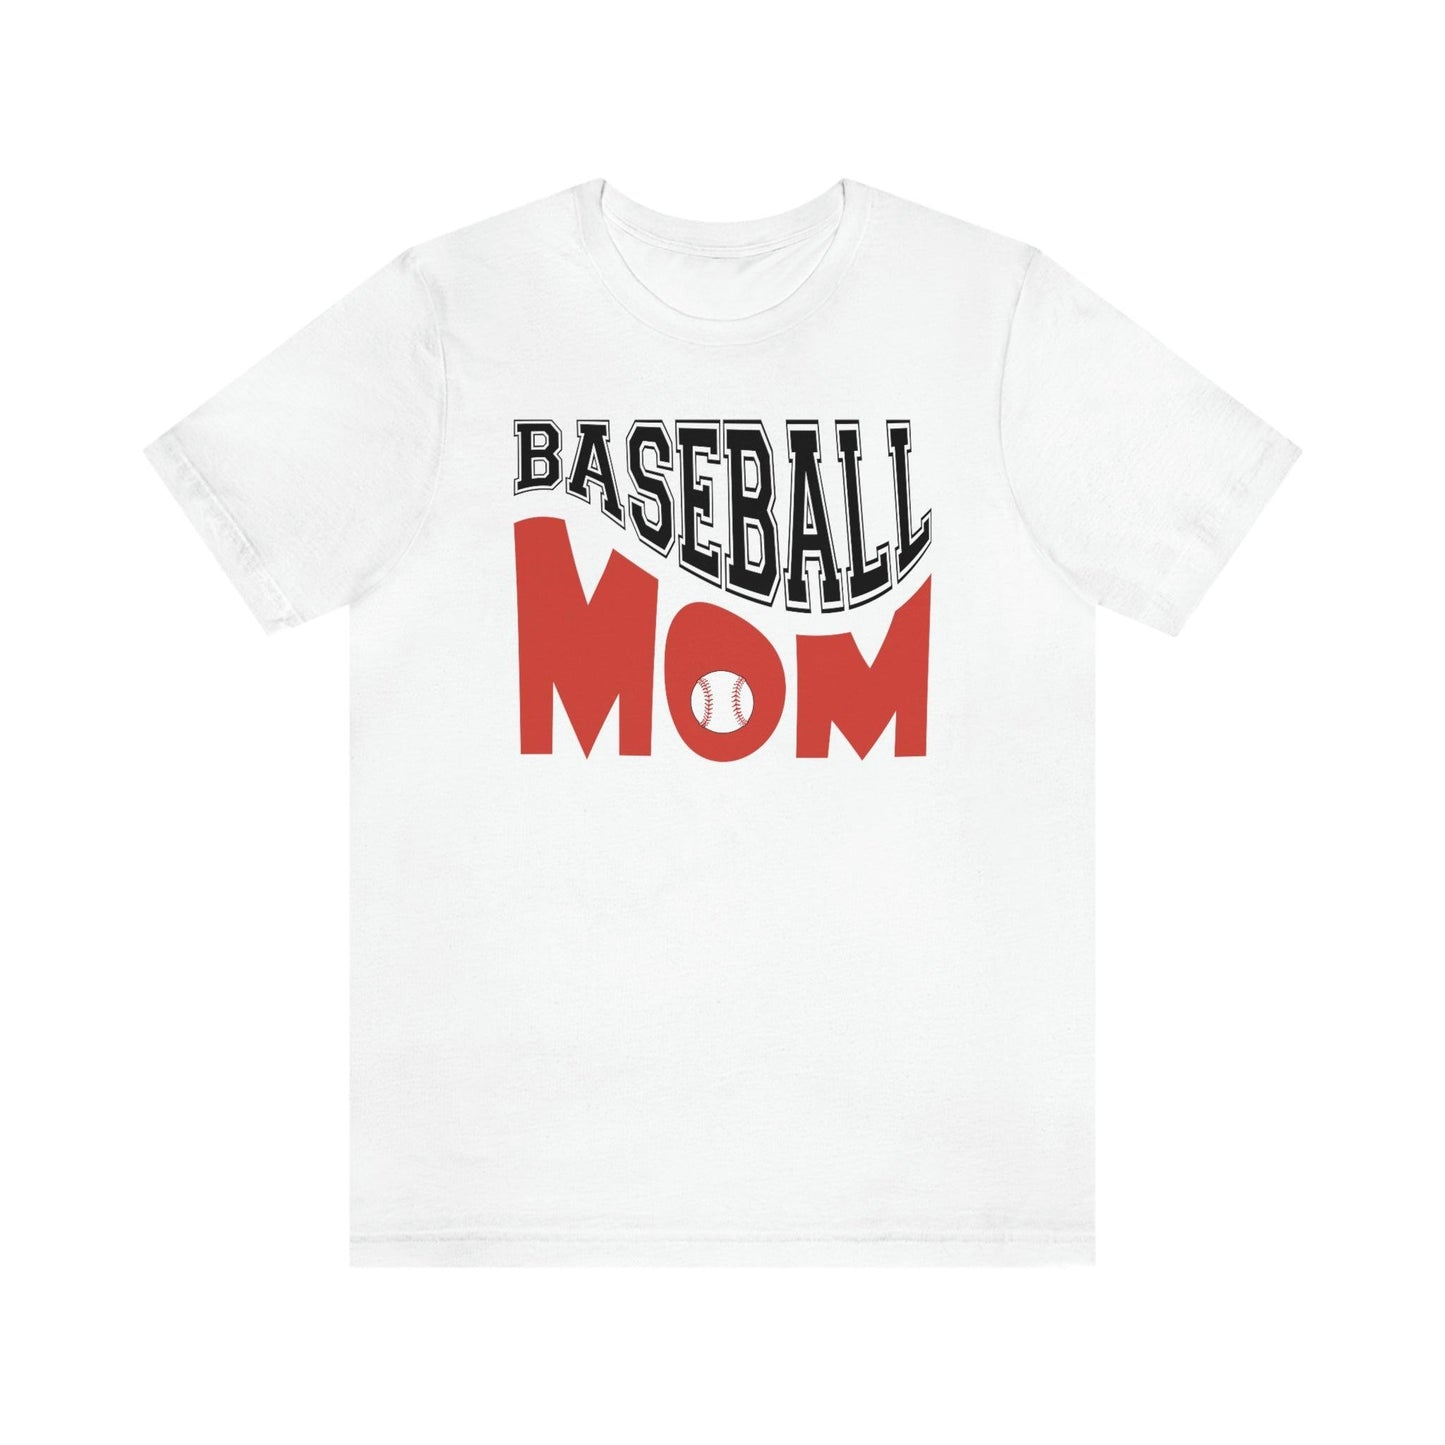 Baseball Mom shirt Baseball shirt baseball tee baseball tshirt - Sport shirt Baseball Mom tshirt Baseball Mama shirt game day shirt for her